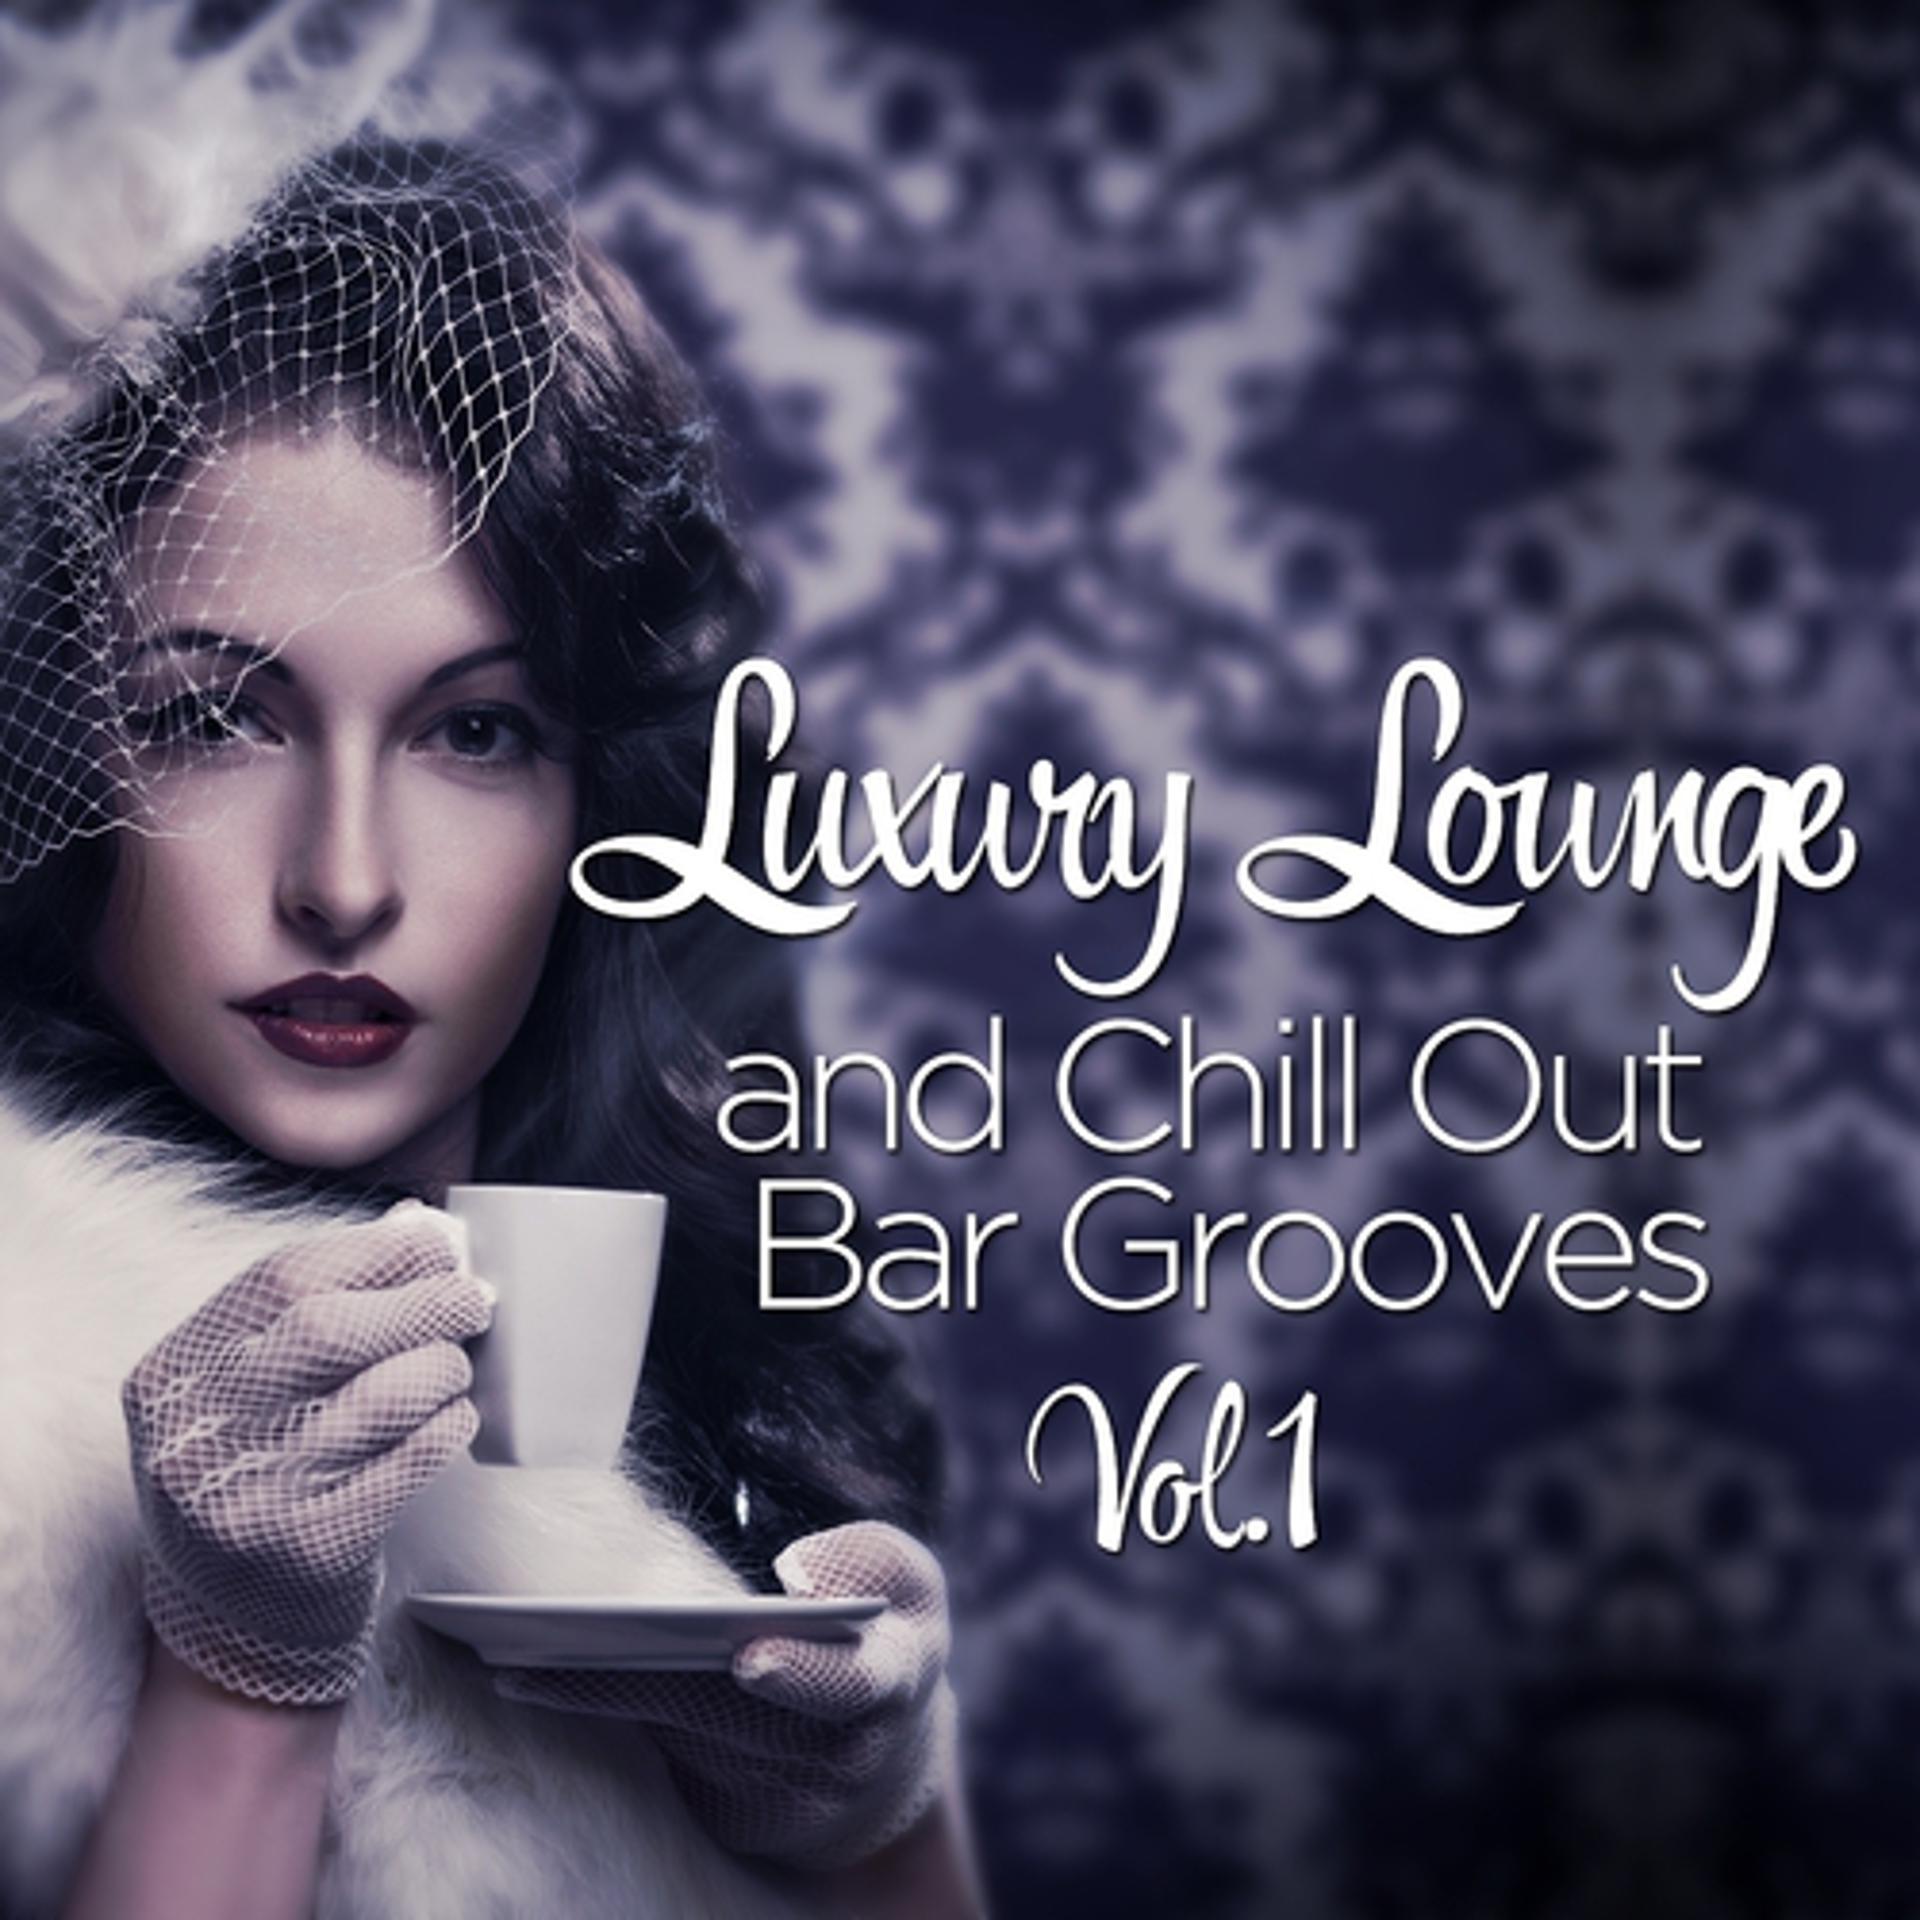 Постер альбома Luxury Lounge And Chill Out Bar Grooves, Vol. 1